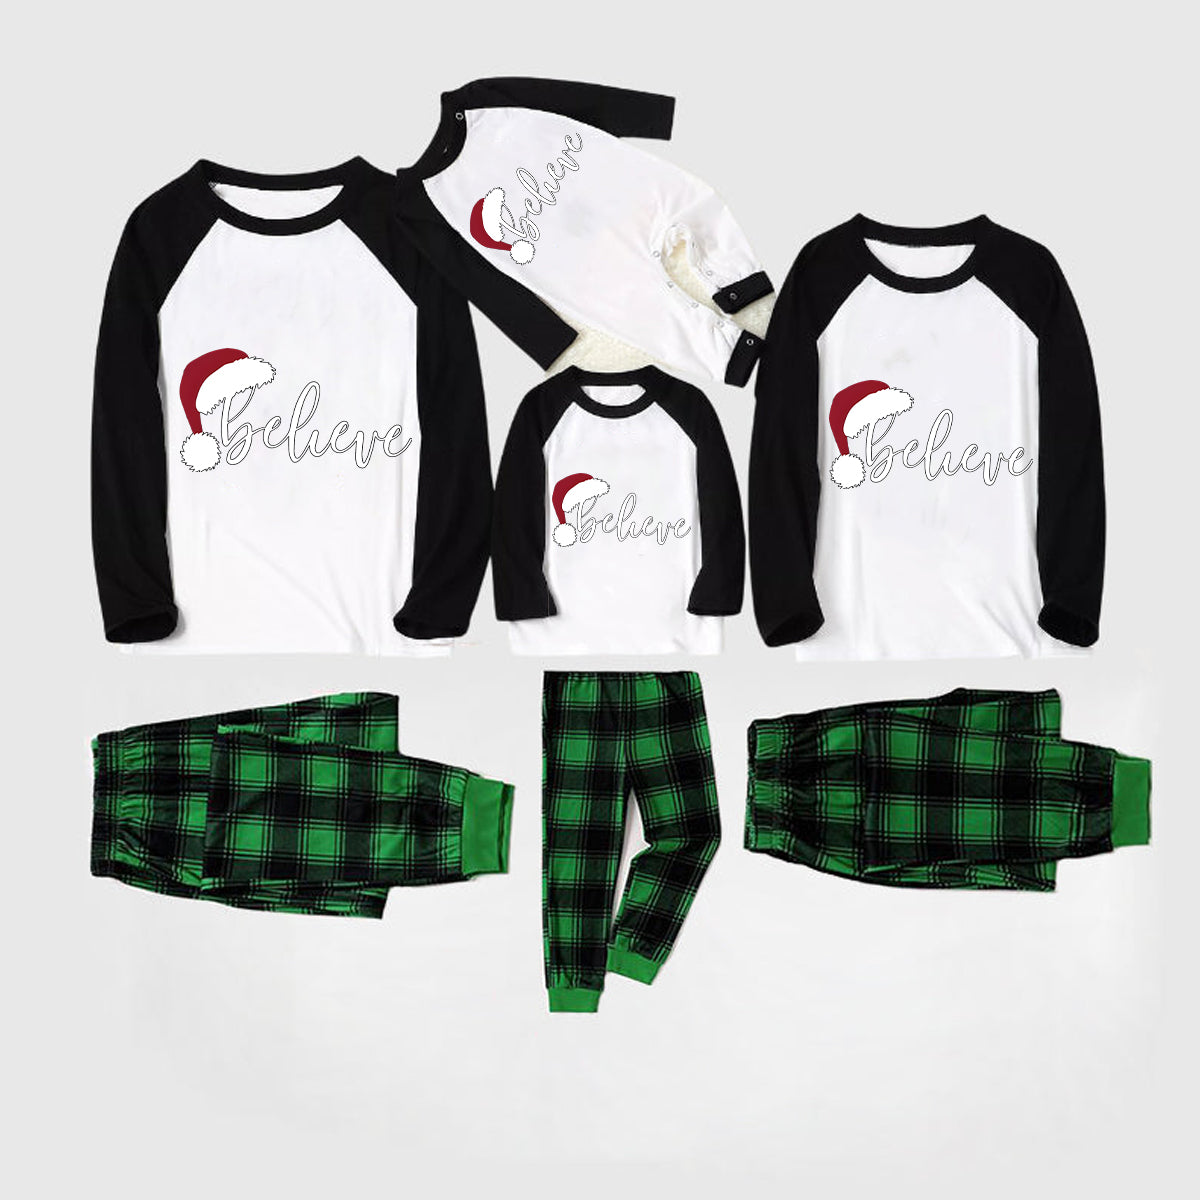 Christmas Hat and ‘Believe“ Letter Print Patterned Black Sleeve Contrast Tops and and Black and Gren Plaid Pants Family Matching Pajamas Sets With Dog Bandana